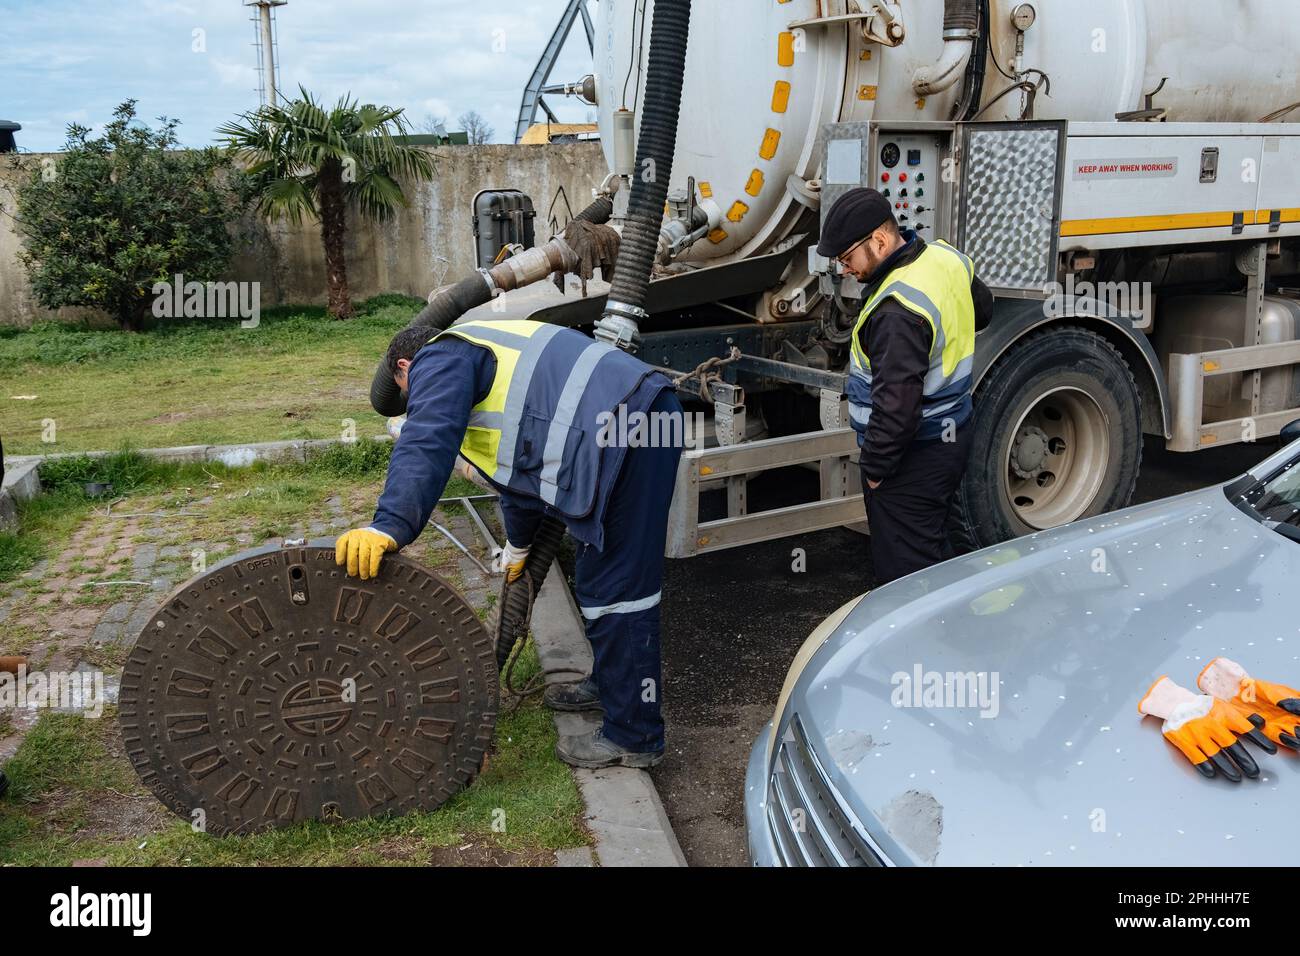 Sewer workers cleaning manhole and unblocking sewers the street sidewalk. Stock Photo